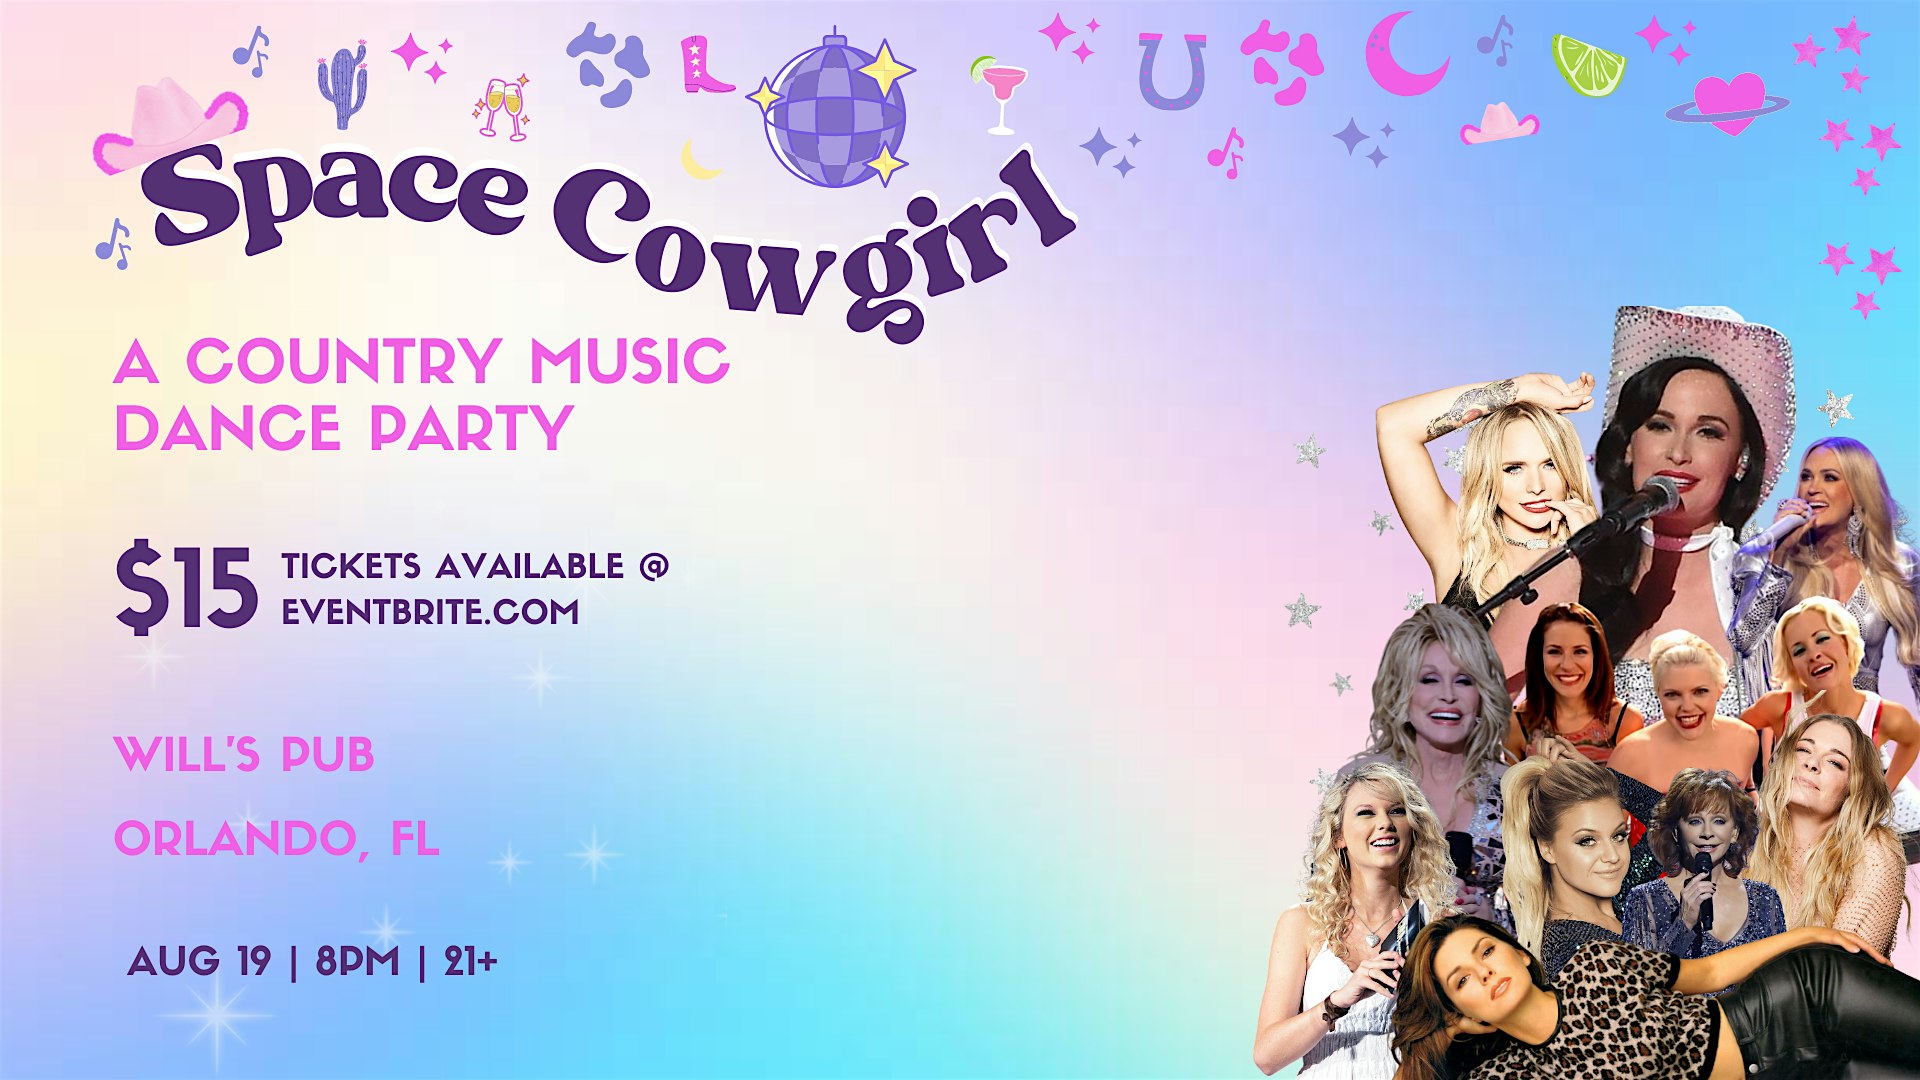 Space Cowgirl: A Country Music Dance Party in Orlando at Will's Pub (brought to you by Le Petite Fete)